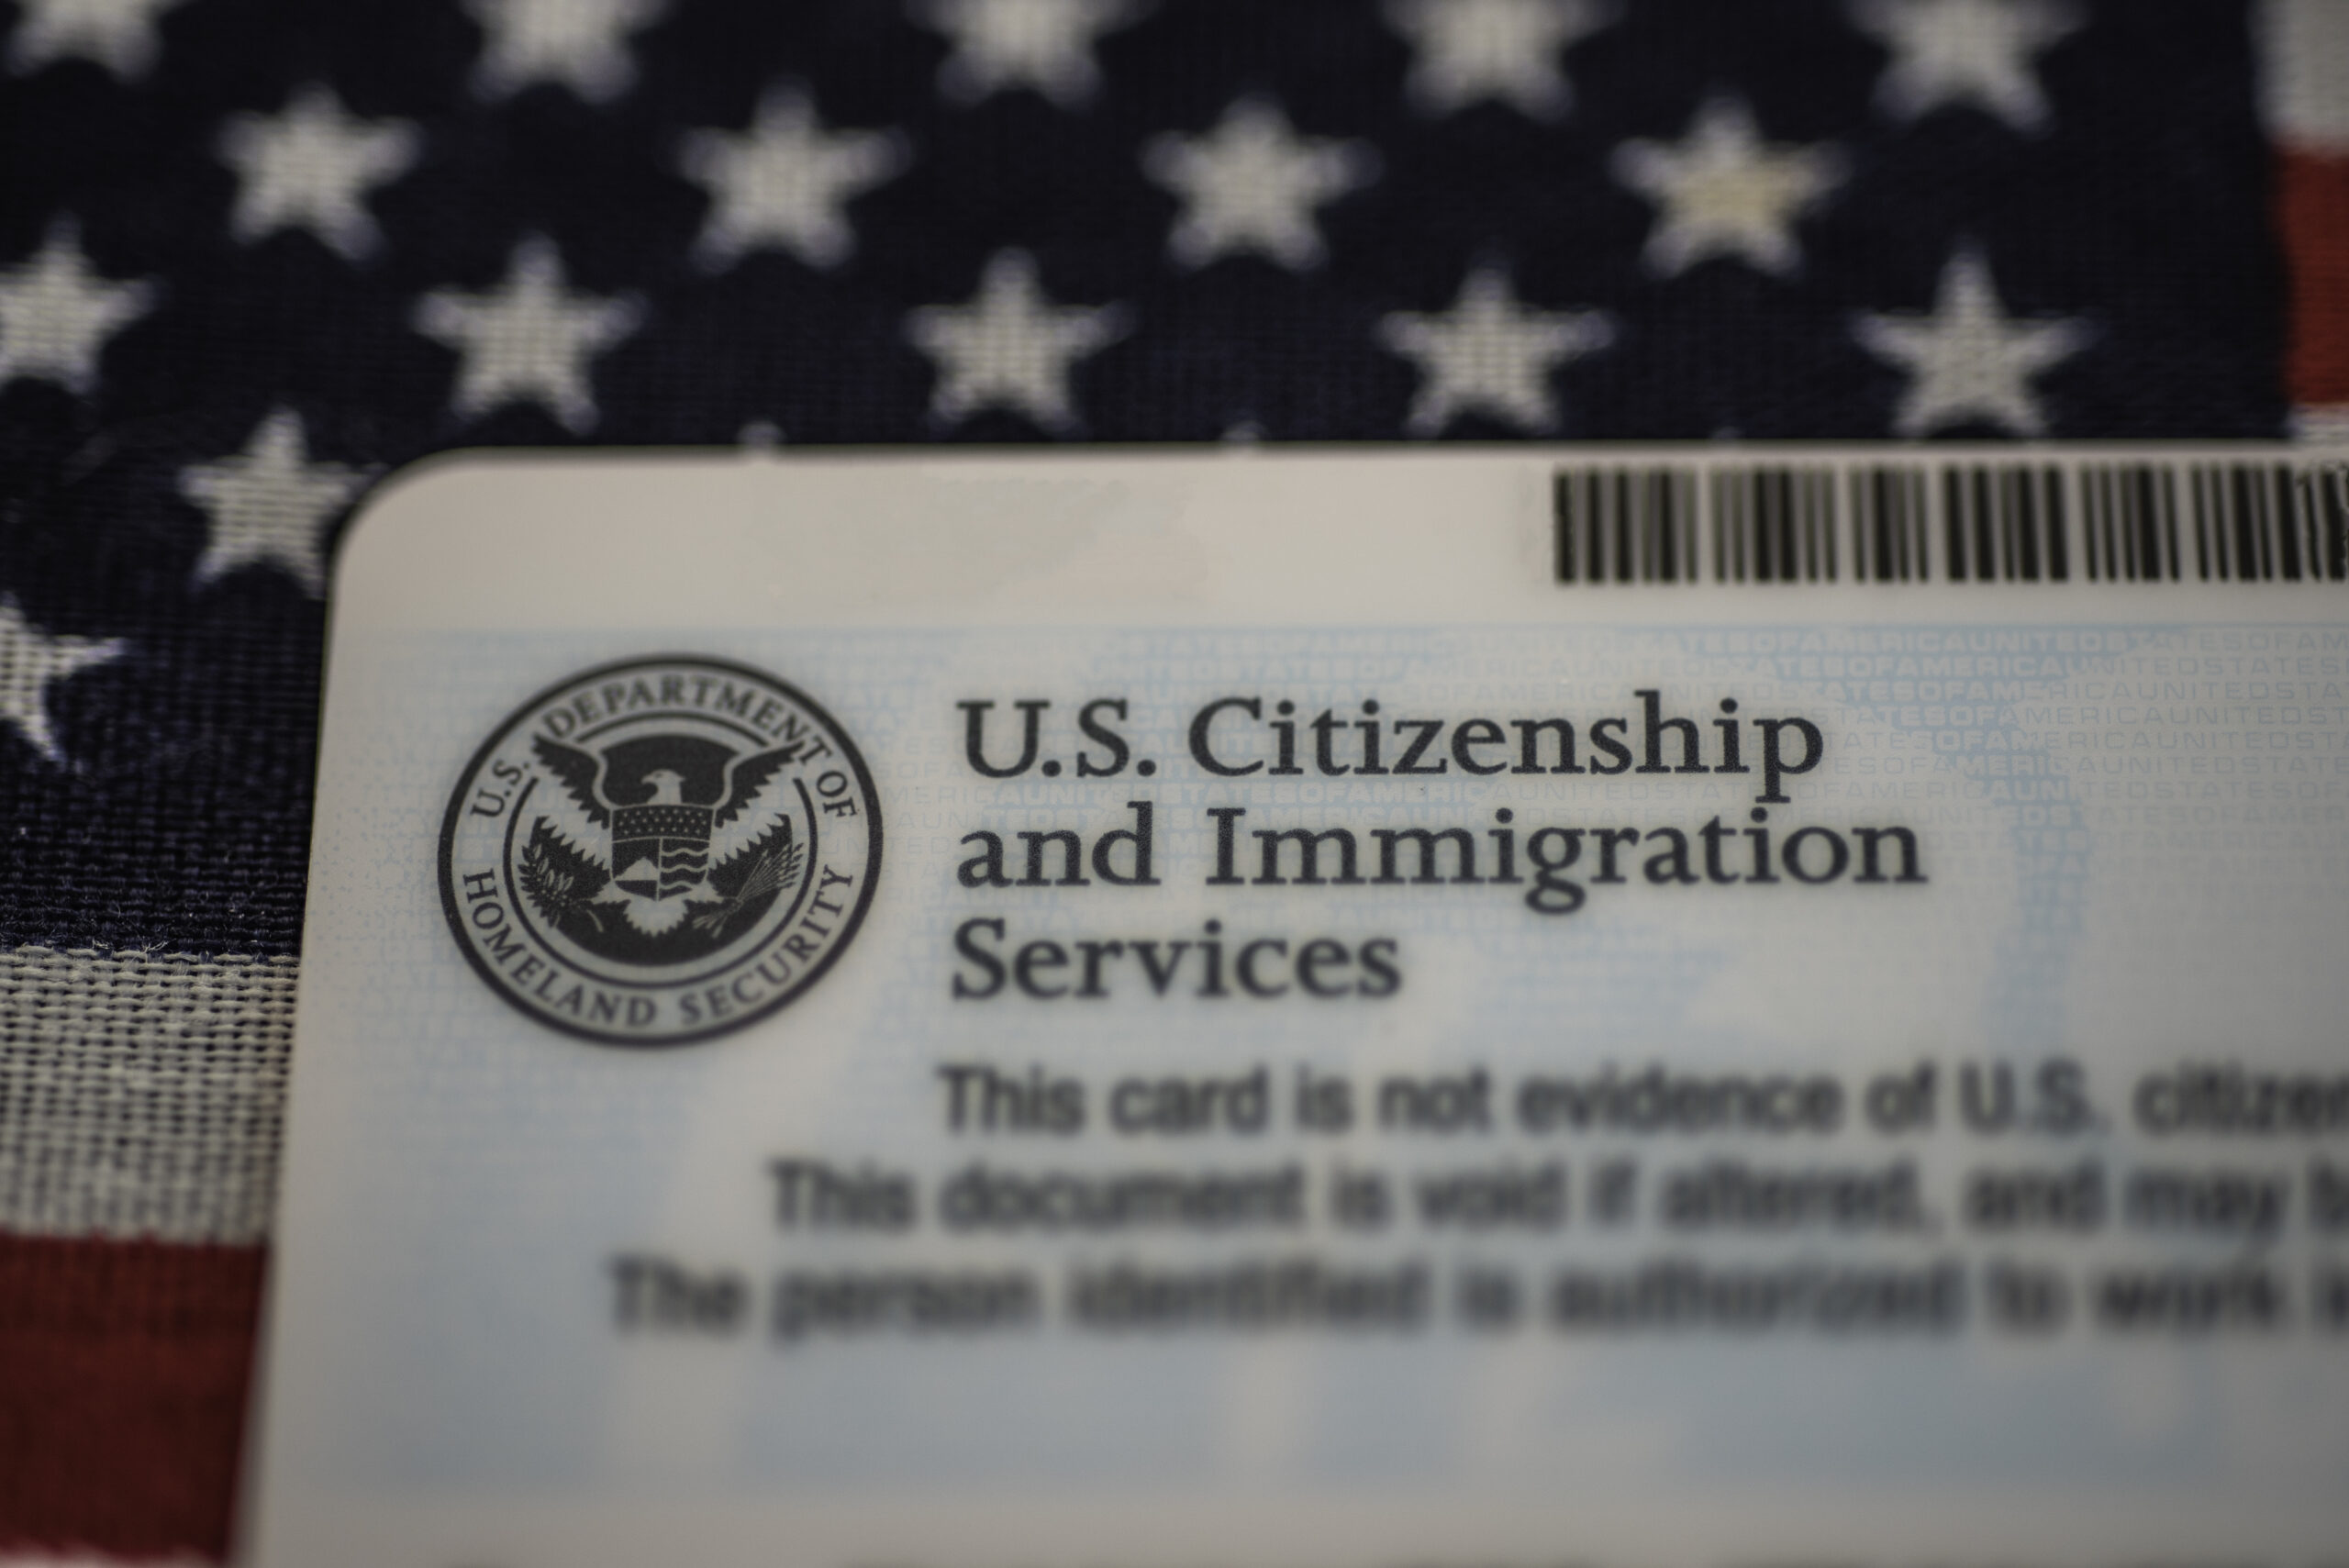 Photo of text which says U.S. Citizen and Immigration Services.